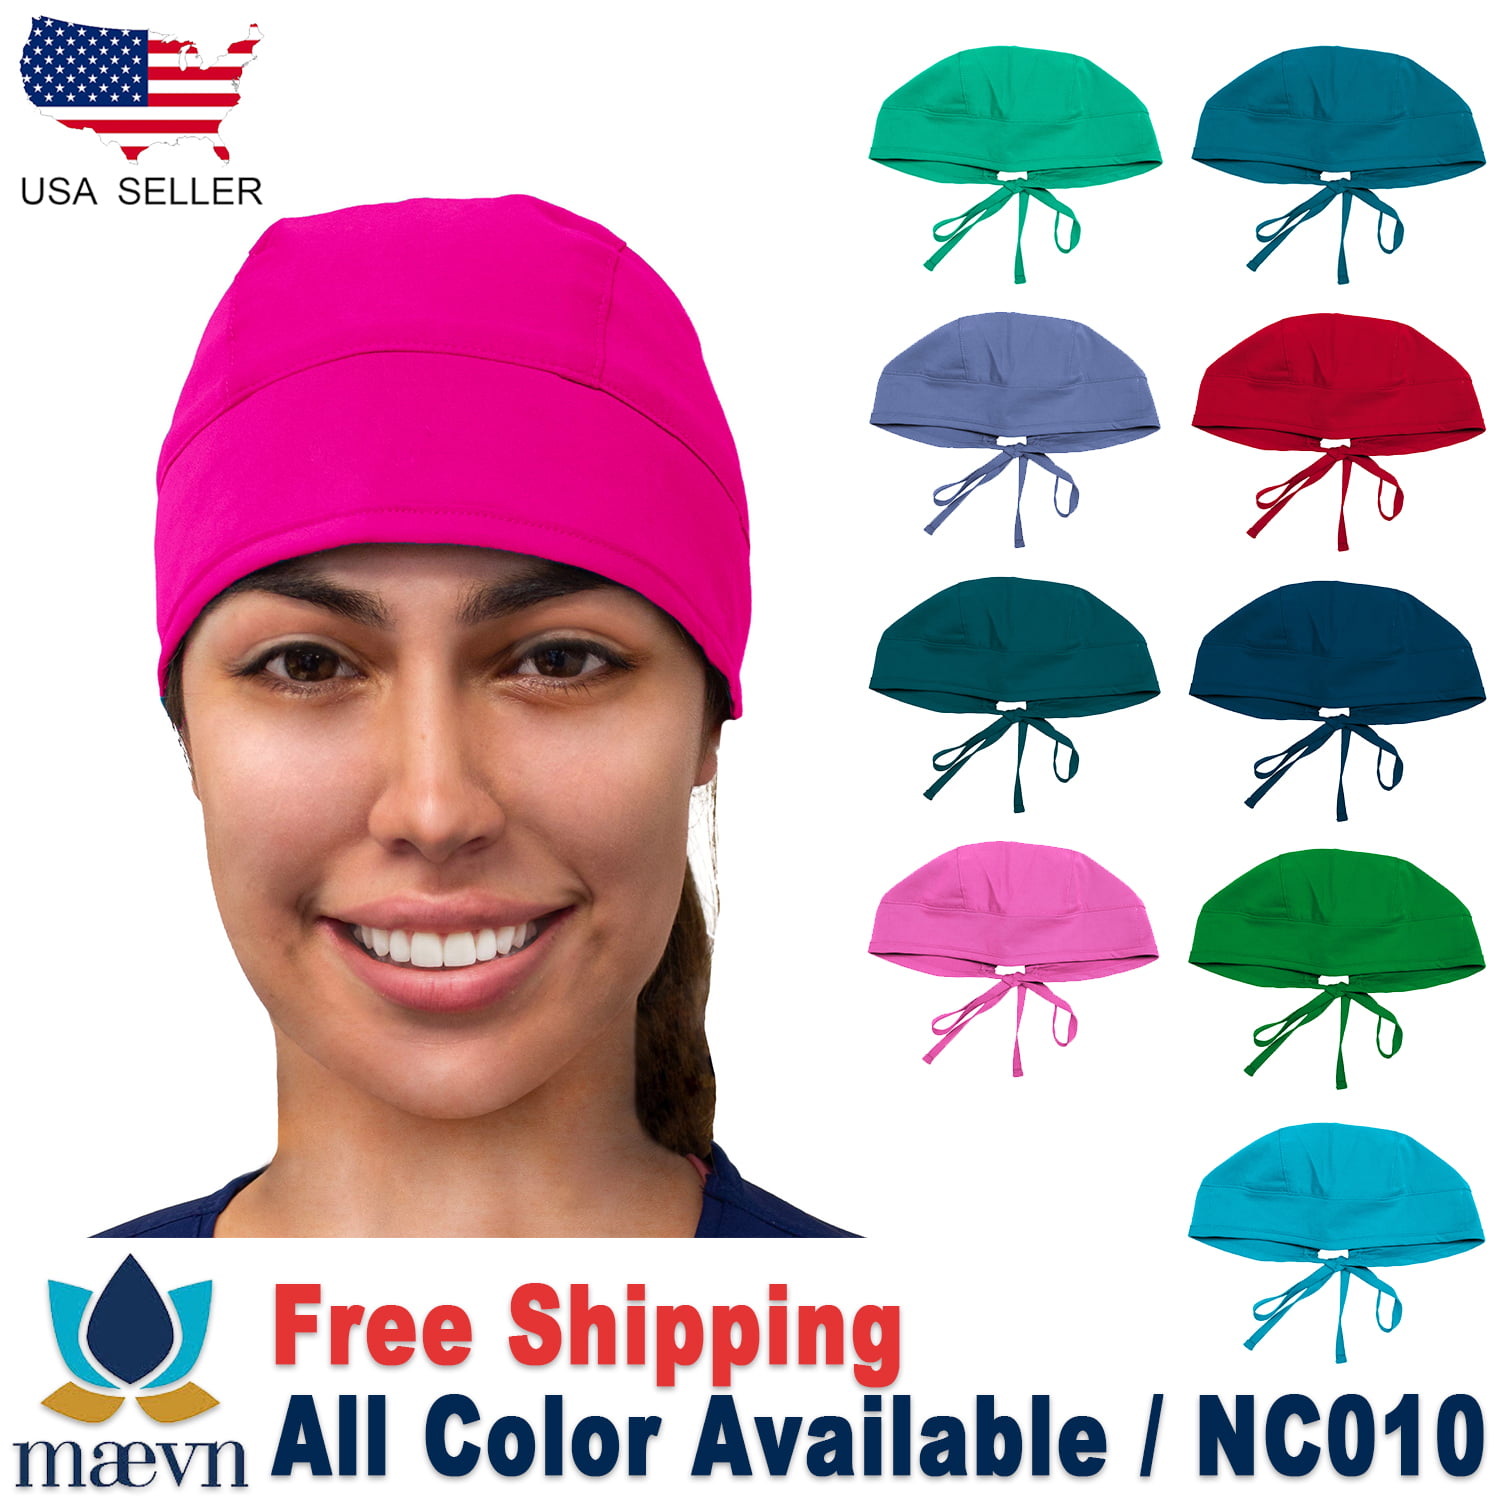 FENICAL 5pcs Adjustable Surgical Cap Cotton Flamingo Pattern Scrub Hat Medical Doctor Nurse Sweat Absorption Beanie for Woman Man